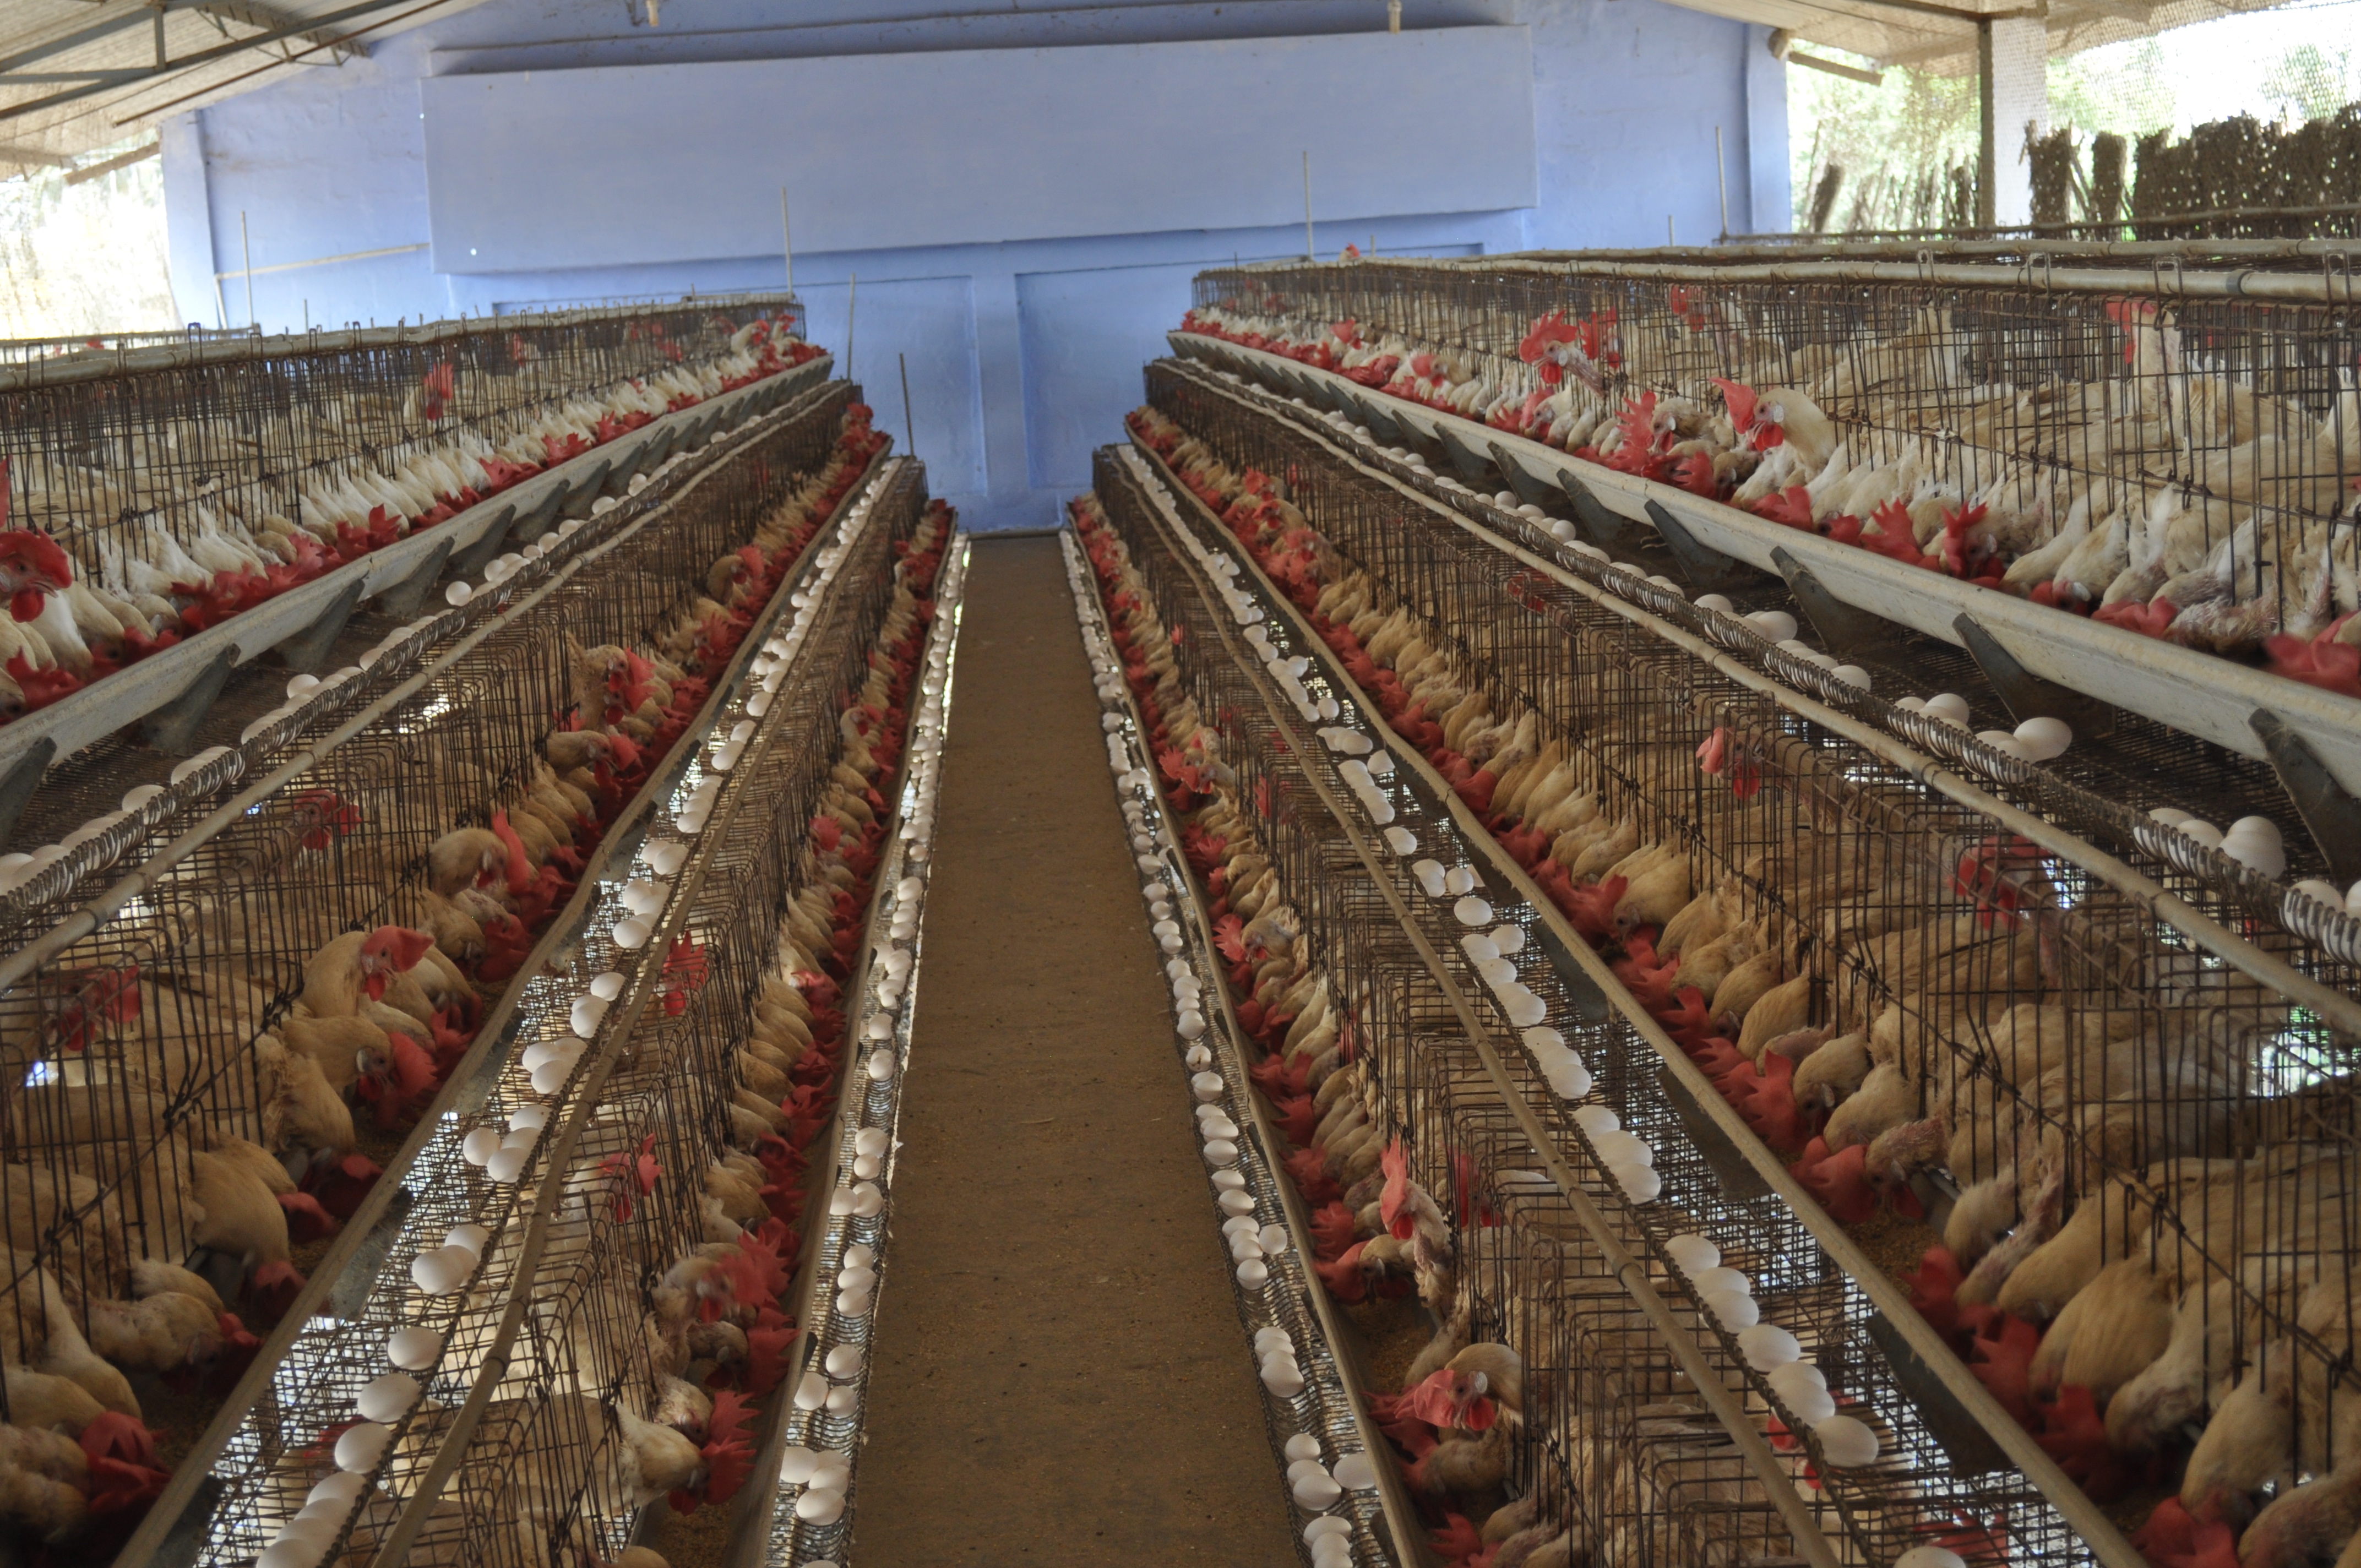 poultry farming in south africa pdf